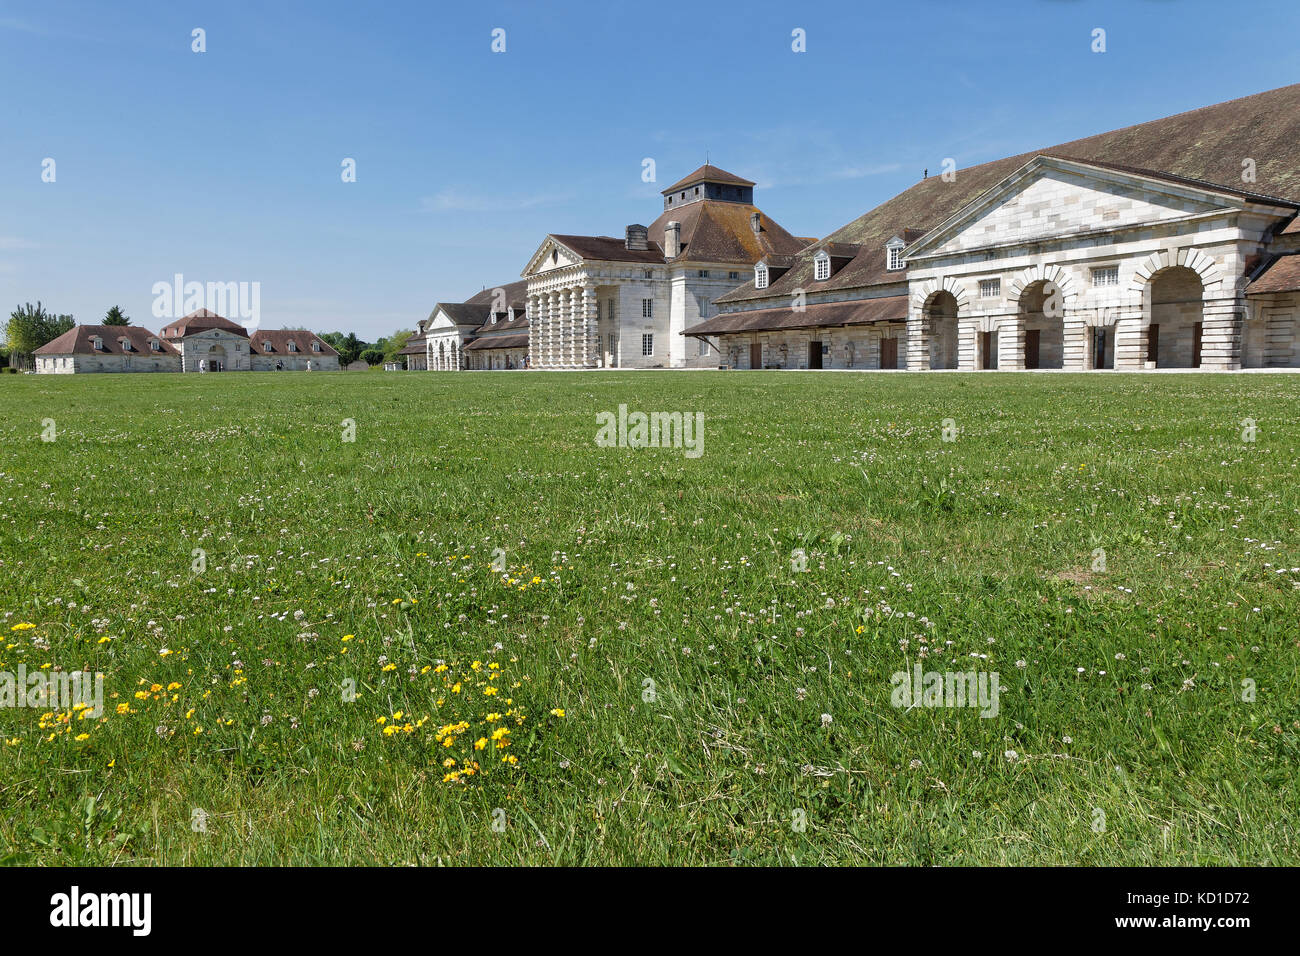 Salines Royales (Royal Saltworks) at Arc-et-Senans, France. UNESCO added the 'Salines Royales' to its List of World Heritage Sites in 1982. Stock Photo